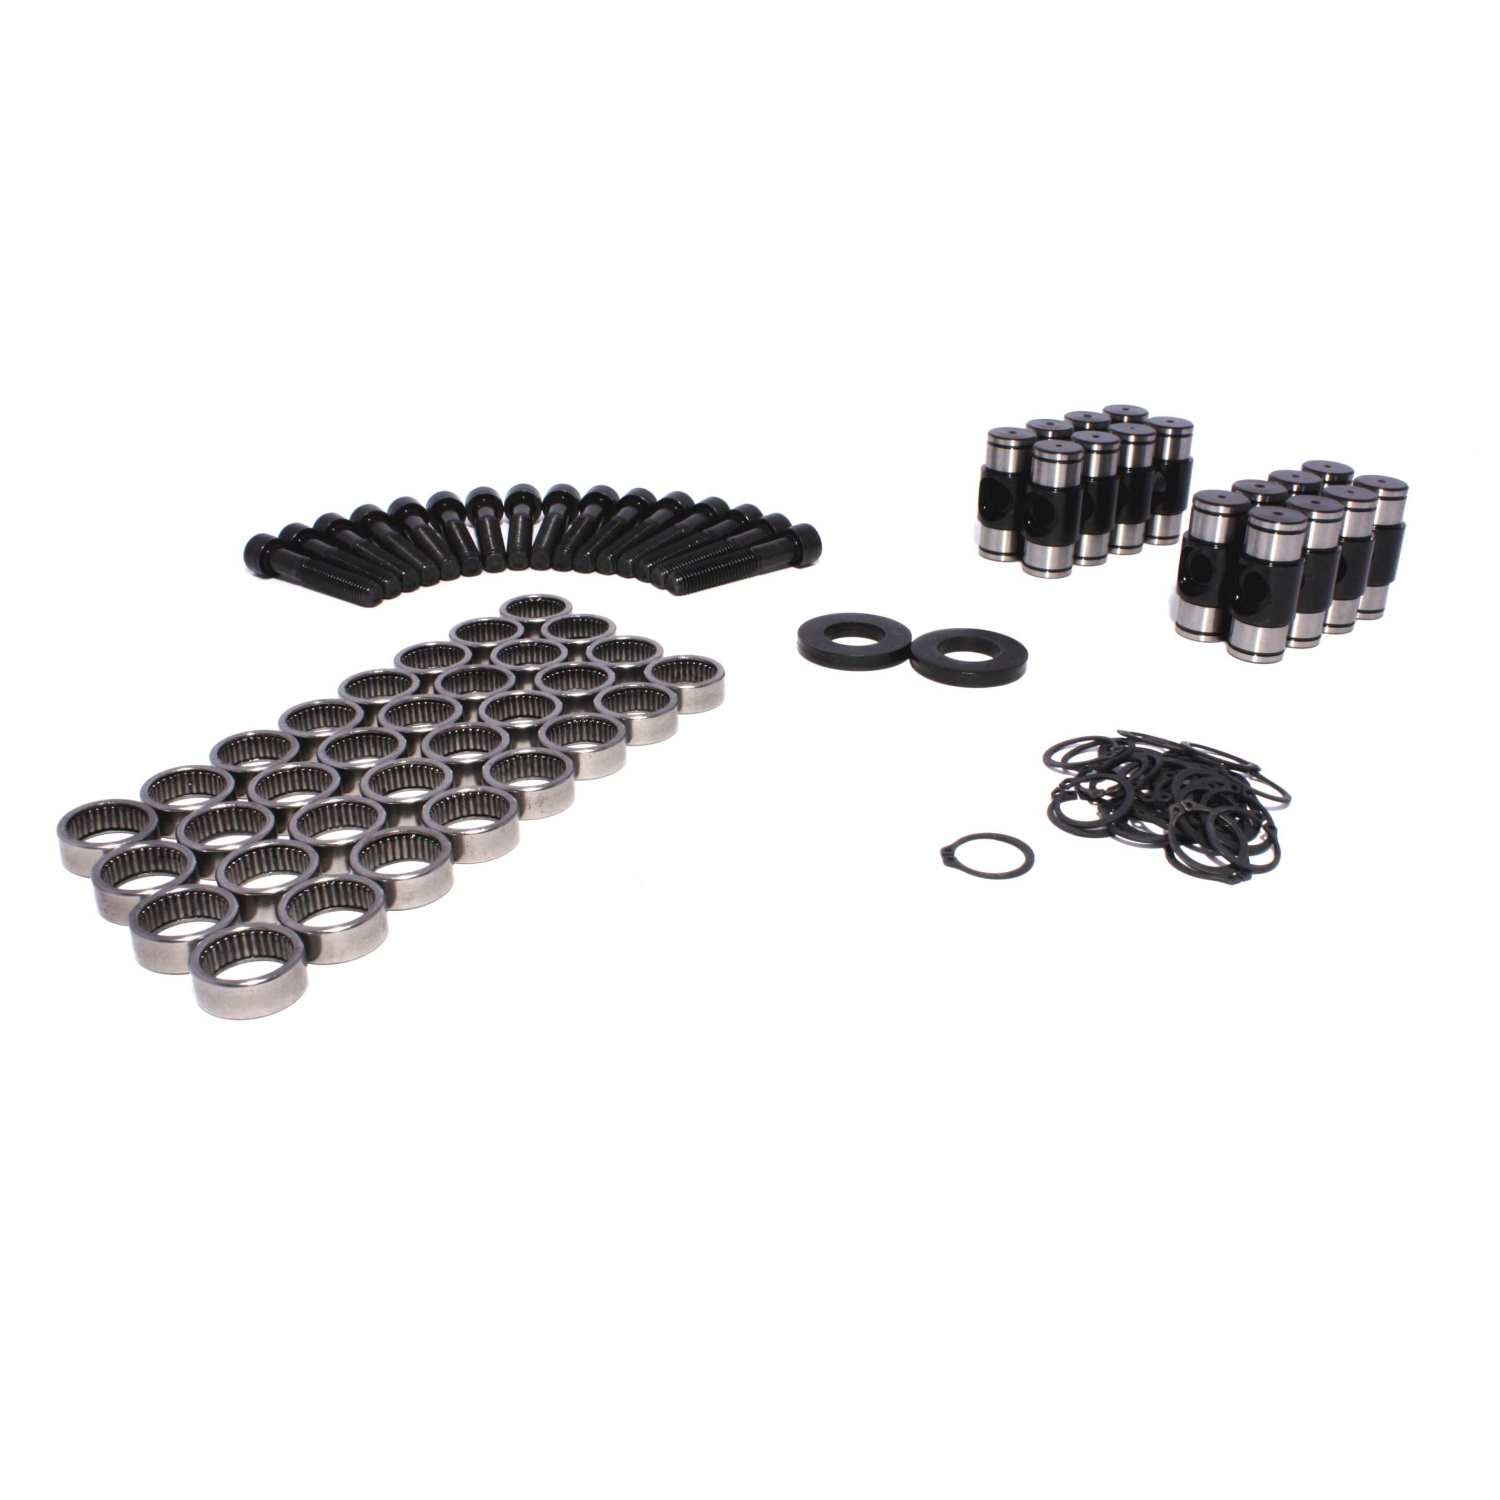 Trunnion Upgrade Kit for GM LS1/LS2/LS3/LS6 Rocker Arms.